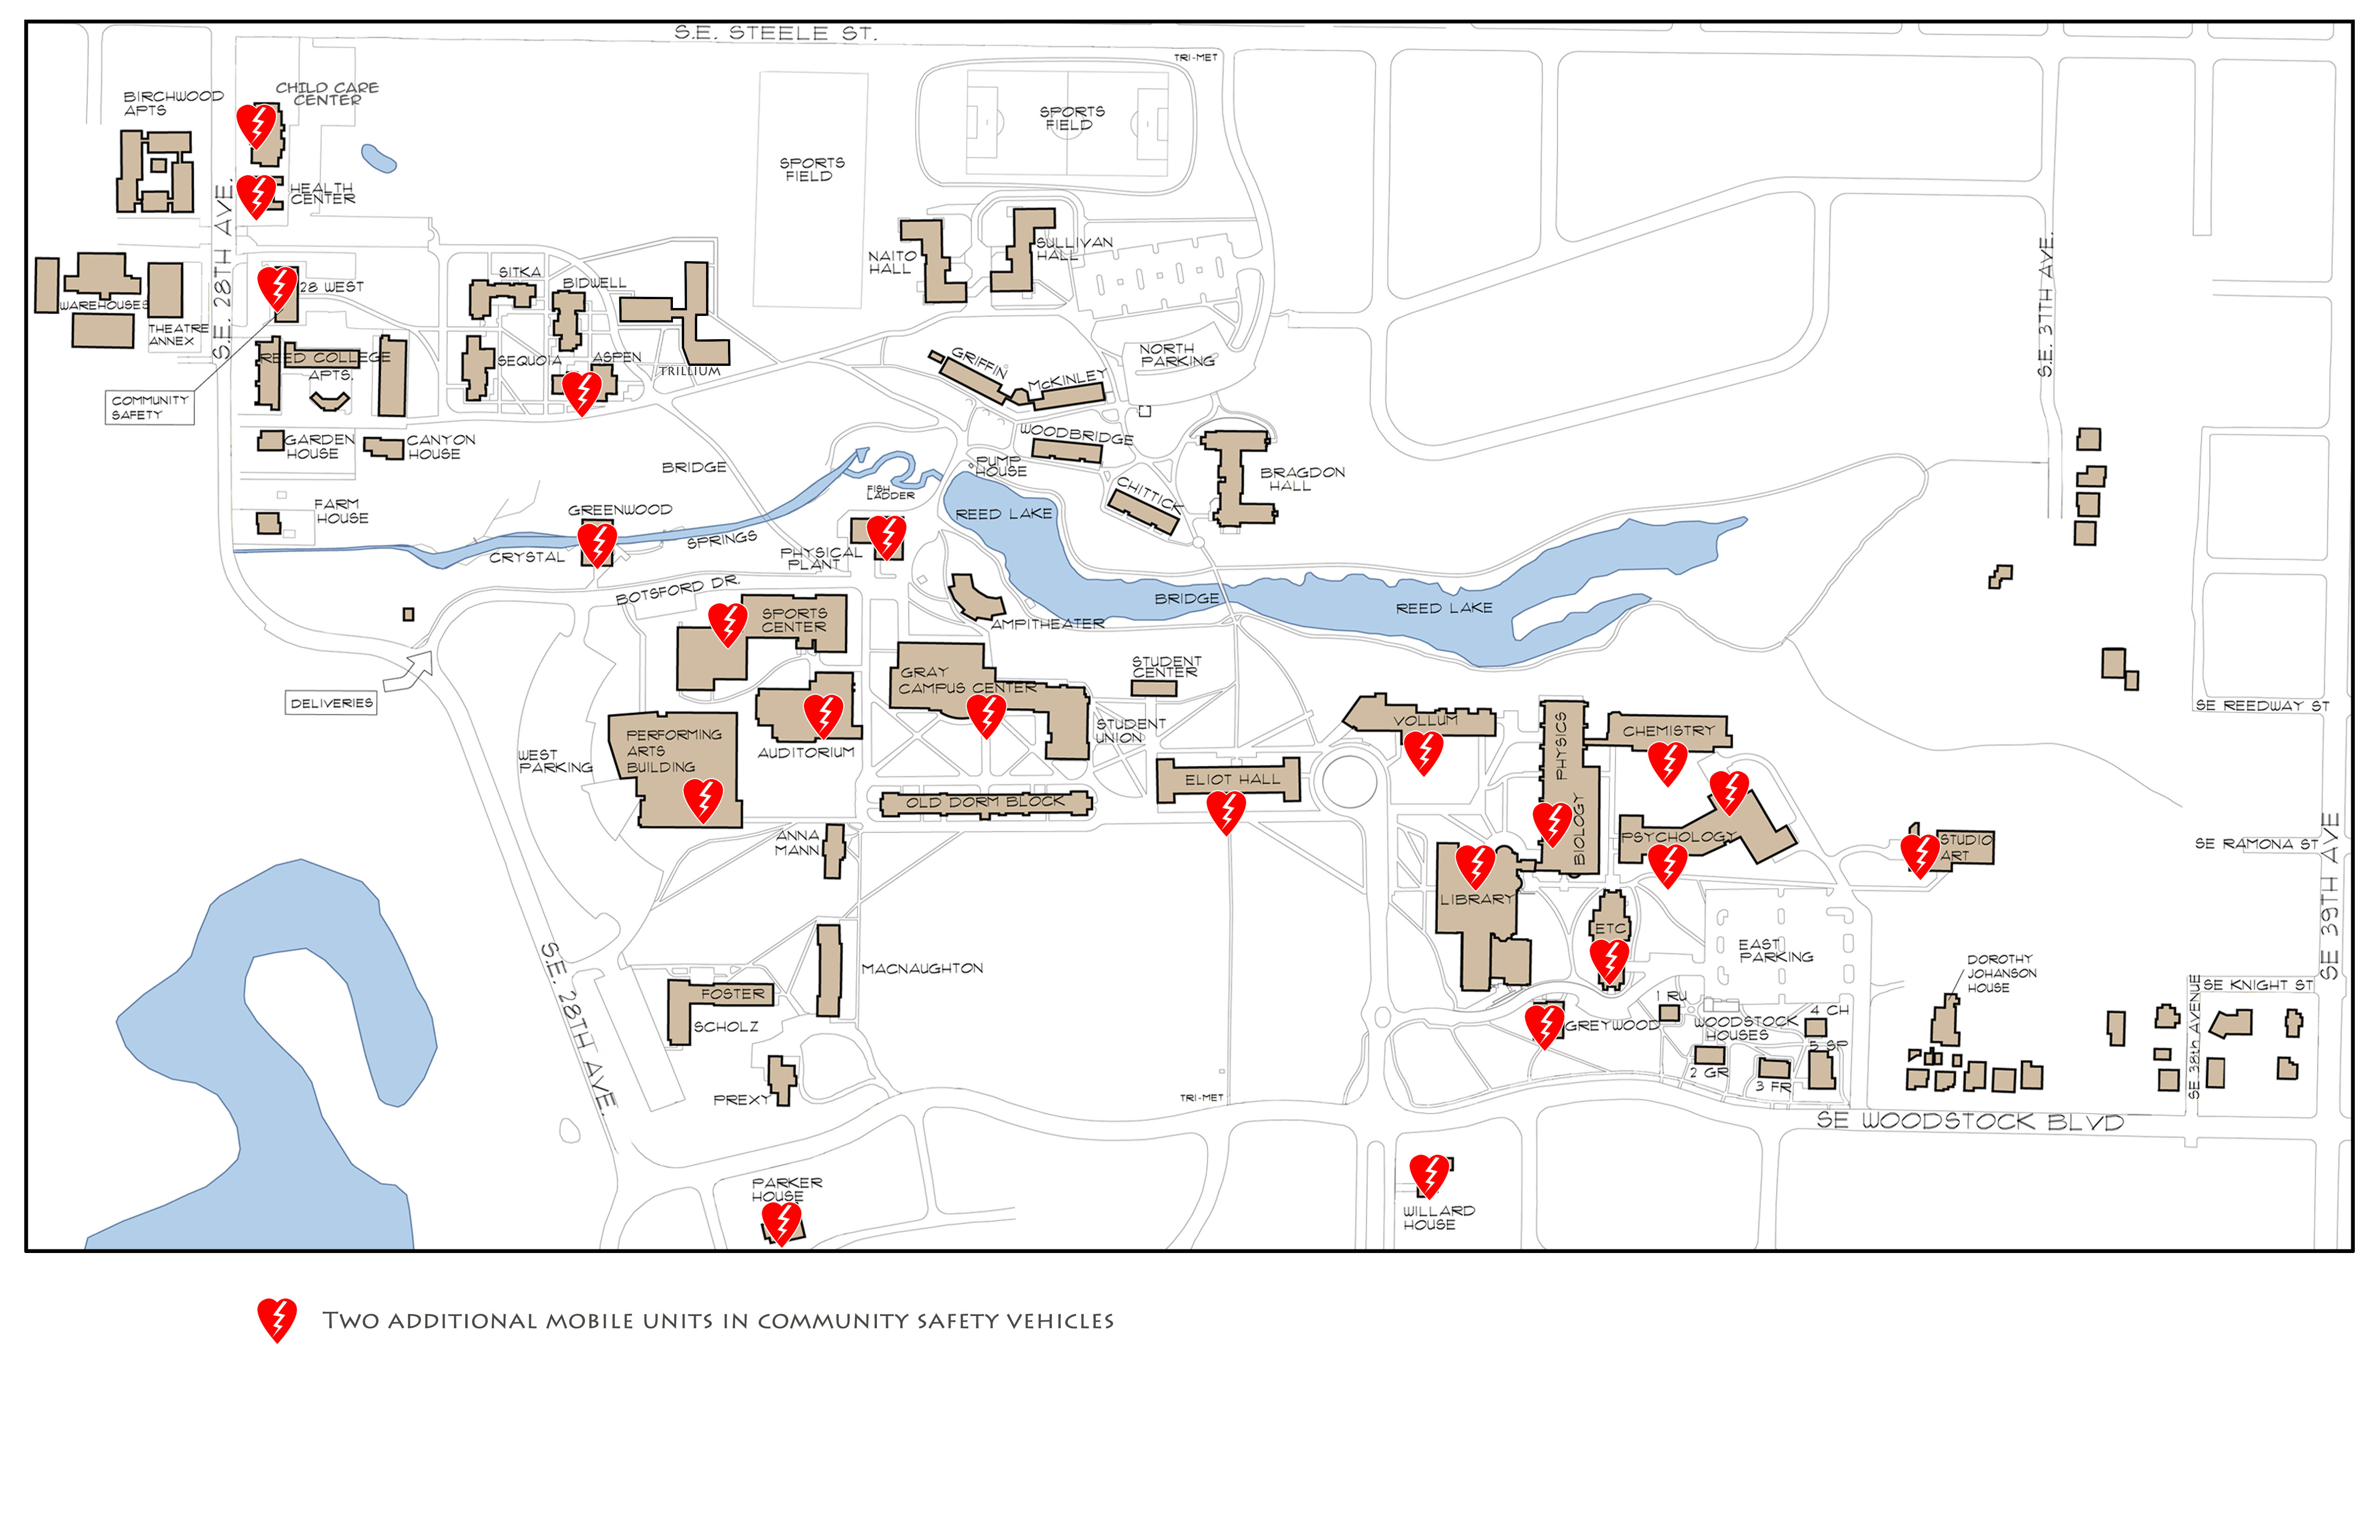 Map showing building and AED locations at Reed College